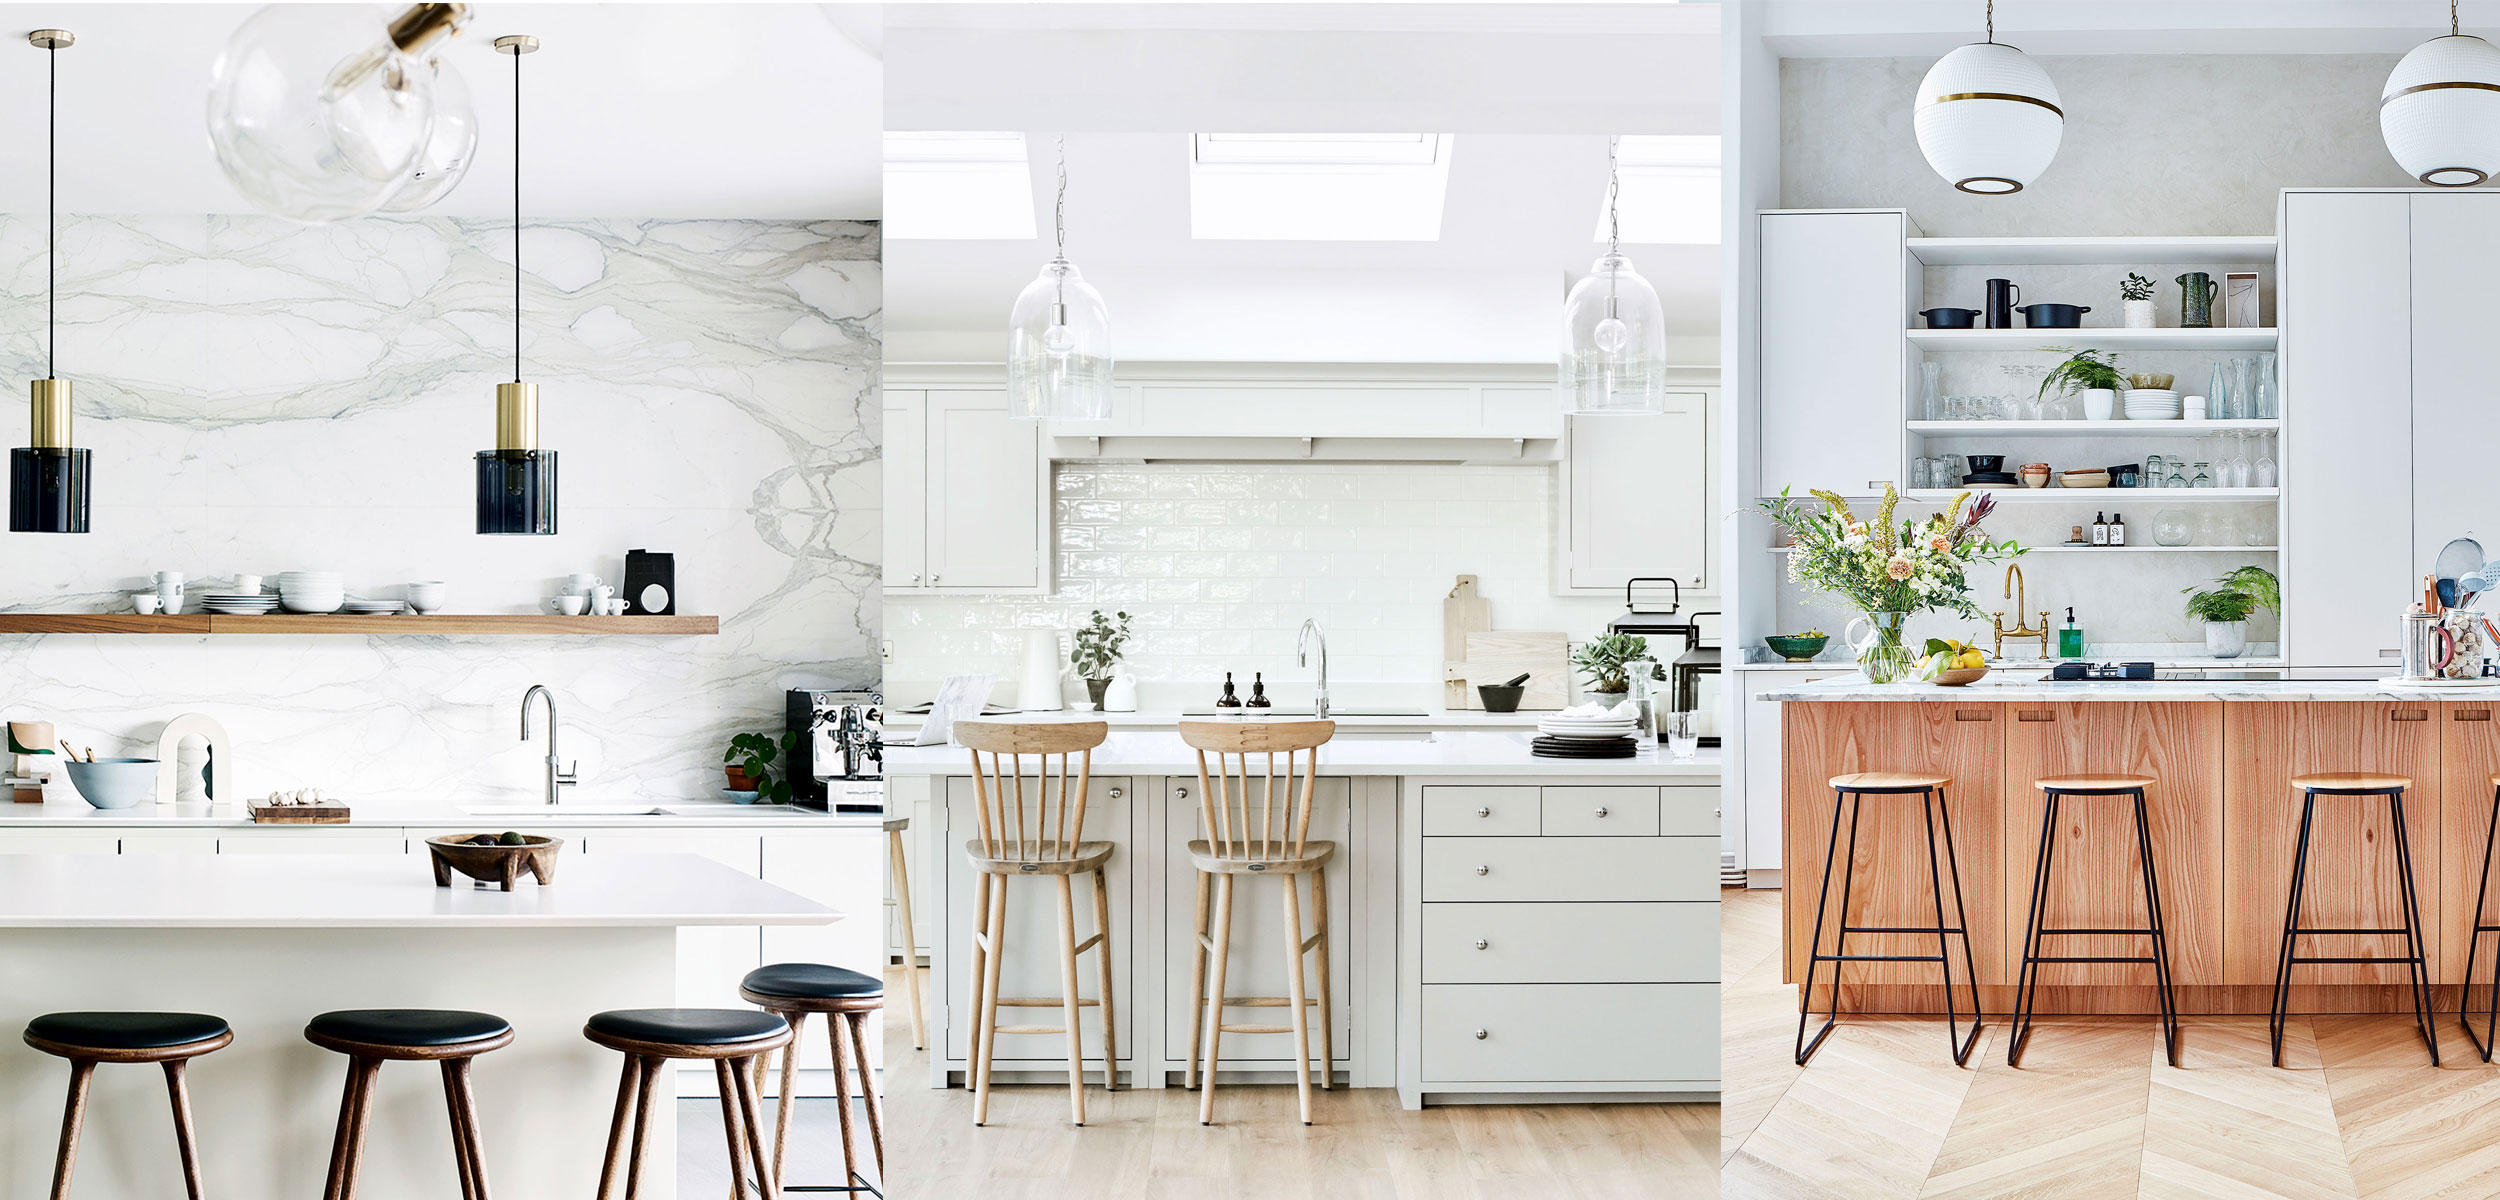 White kitchen ideas 20 ways to use this favorite shade   Homes ...